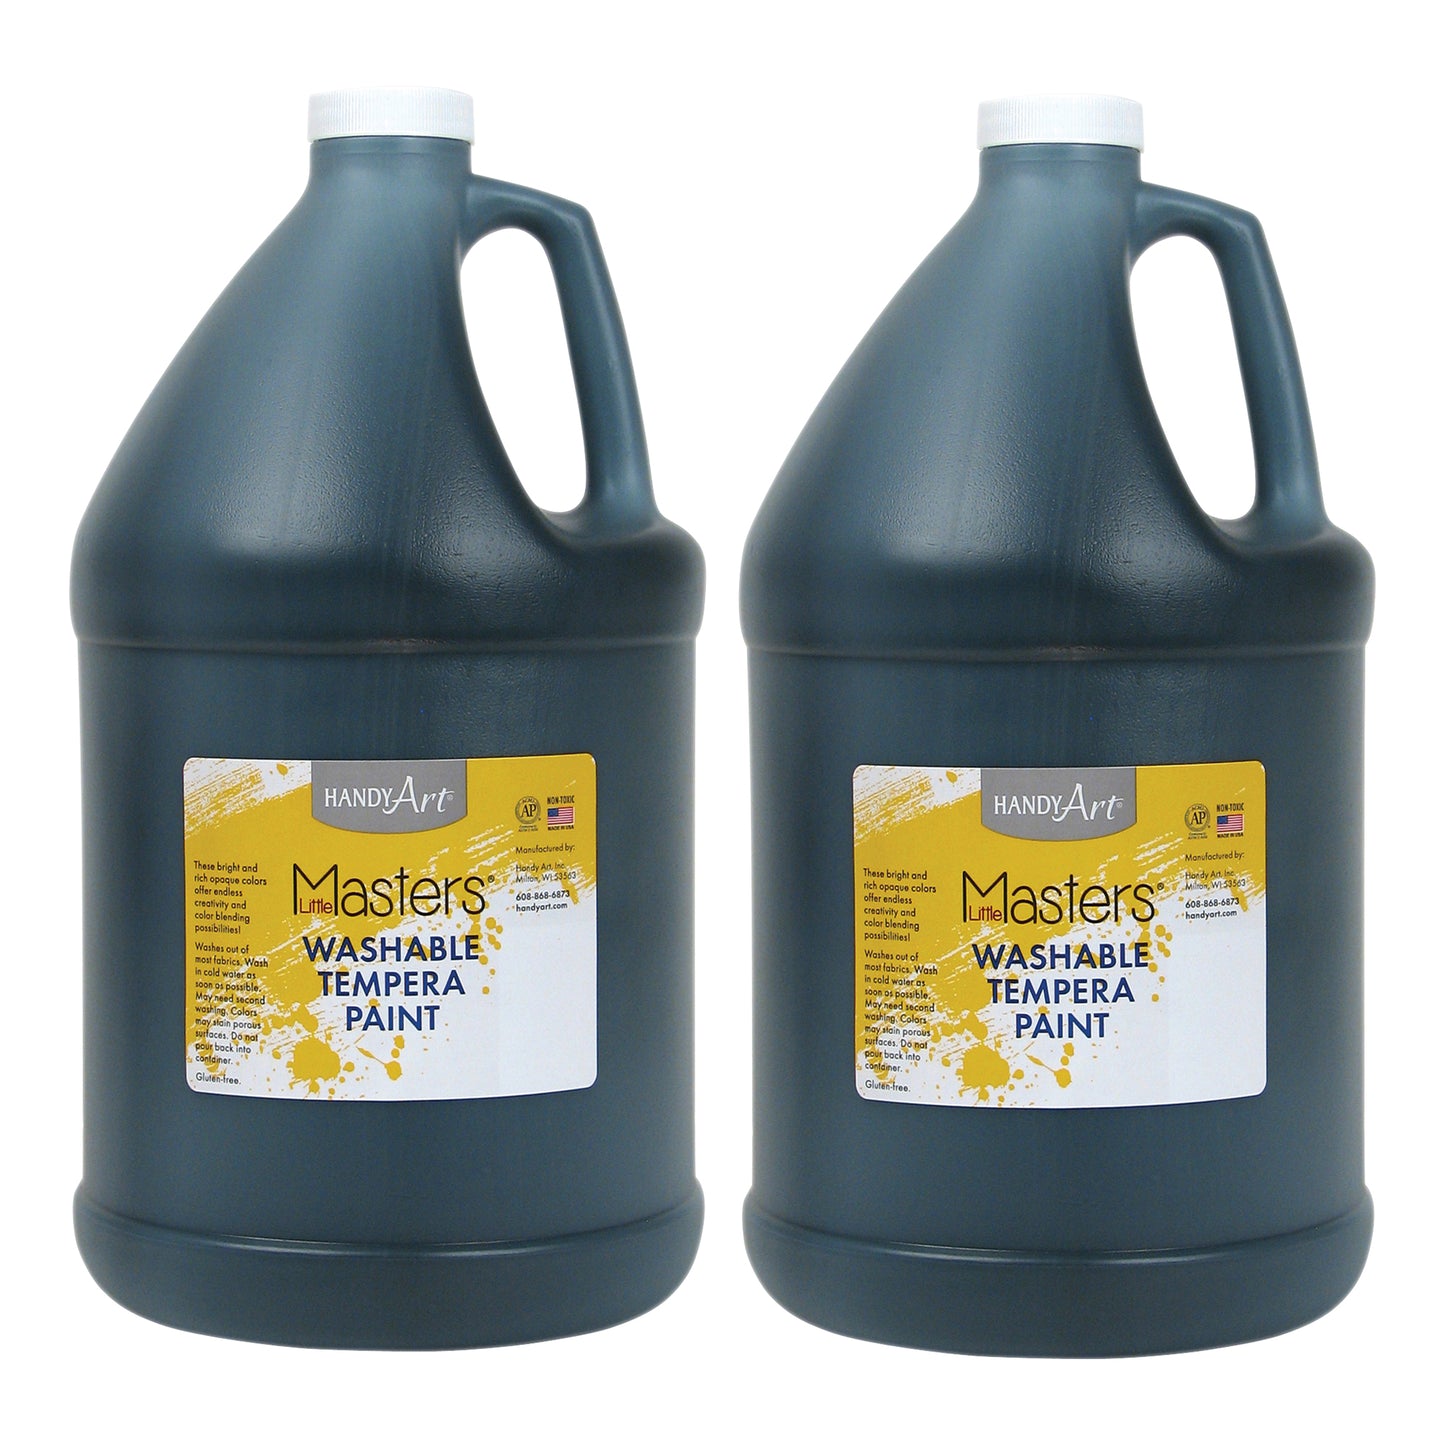 Little Masters® Washable Tempera Paint, Black, Gallon, Pack of 2